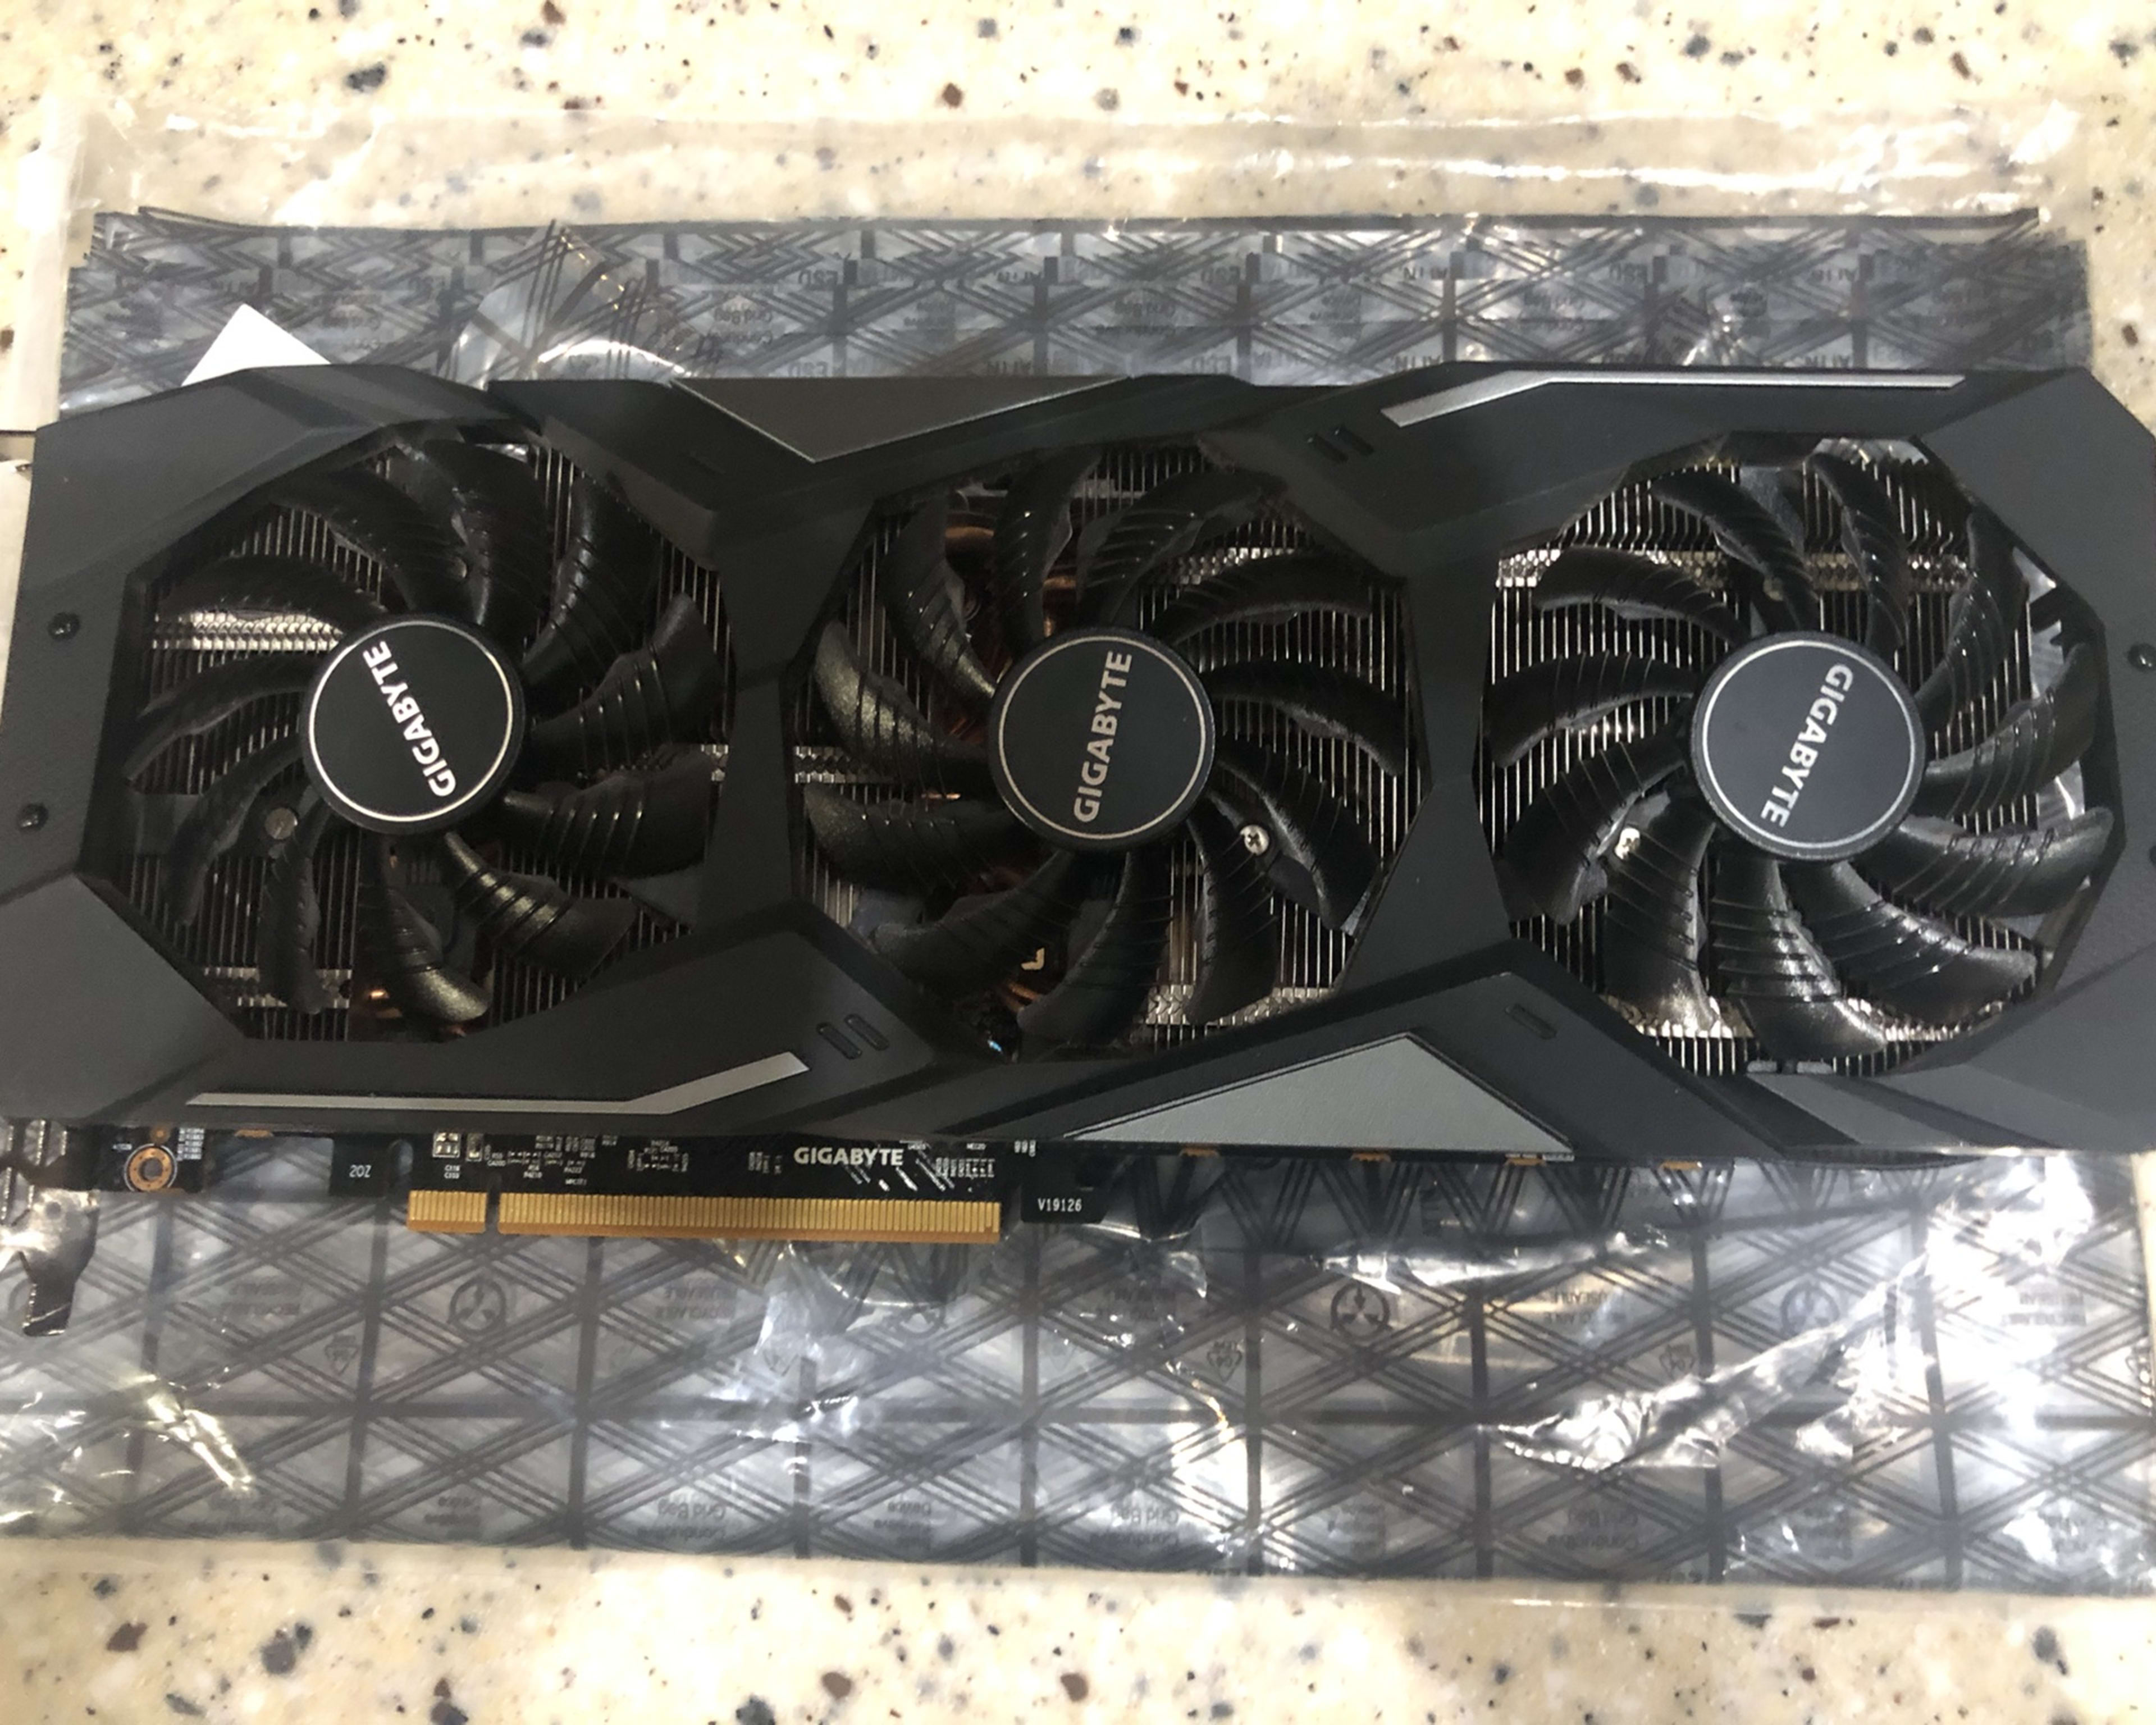 Used & Tested! GIGABYTE Gaming OC, 8GB, RX 5700XT!